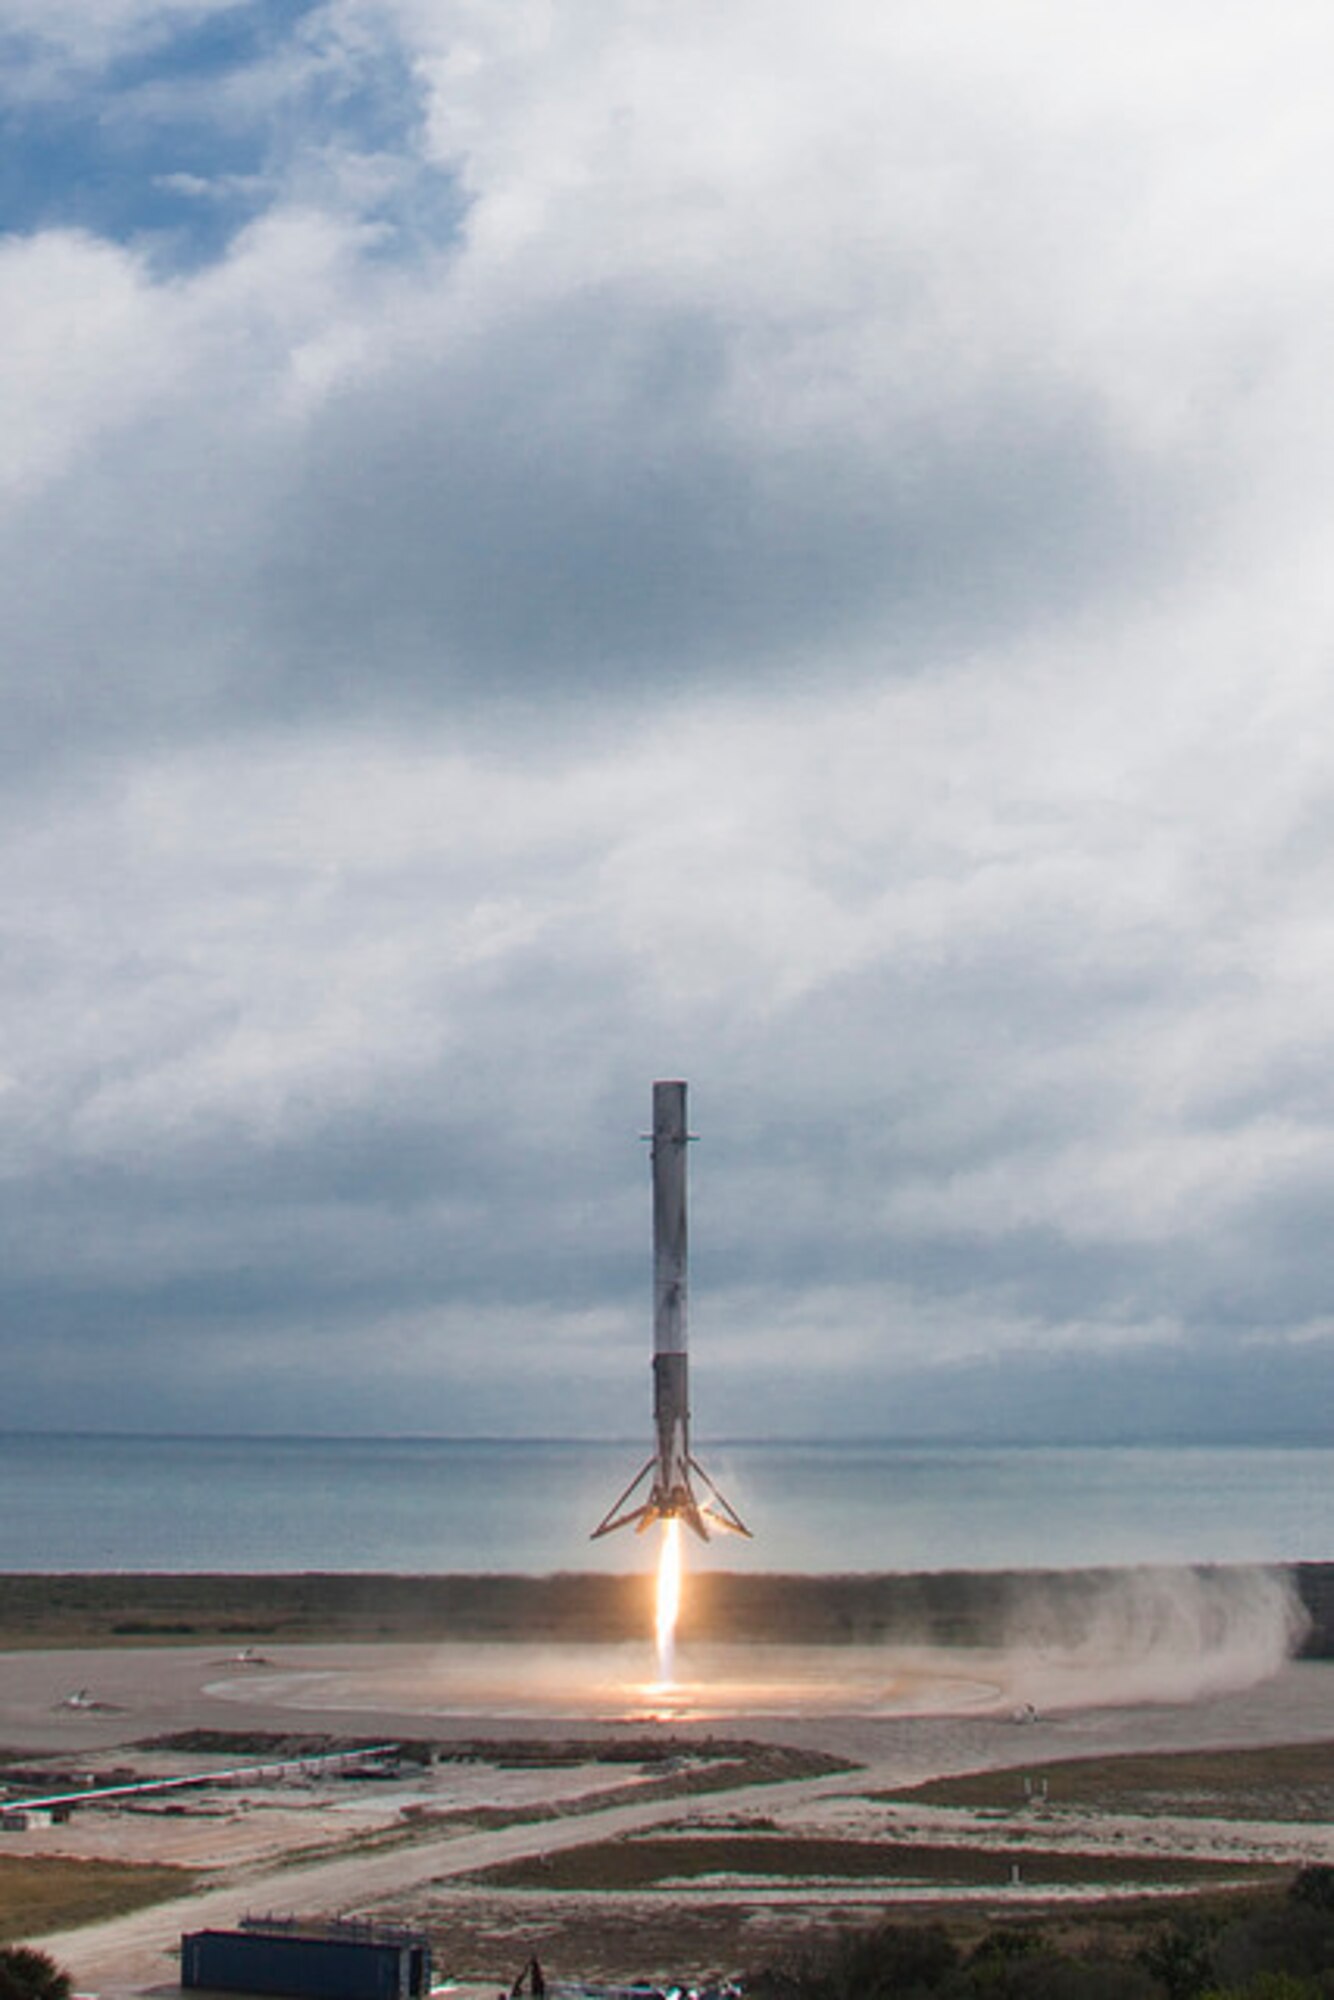 SpaceX Falcon 9's 1st stage booster on Space Launch Complex 13 after landing at Cape Canaveral Air Force Station Feb. 19, 2017. The booster landed minutes after the successful launch of the Falcon 9 carrying the 10th commercial resupply mission to the International Space Station. (Courtesy photo/SpaceX)